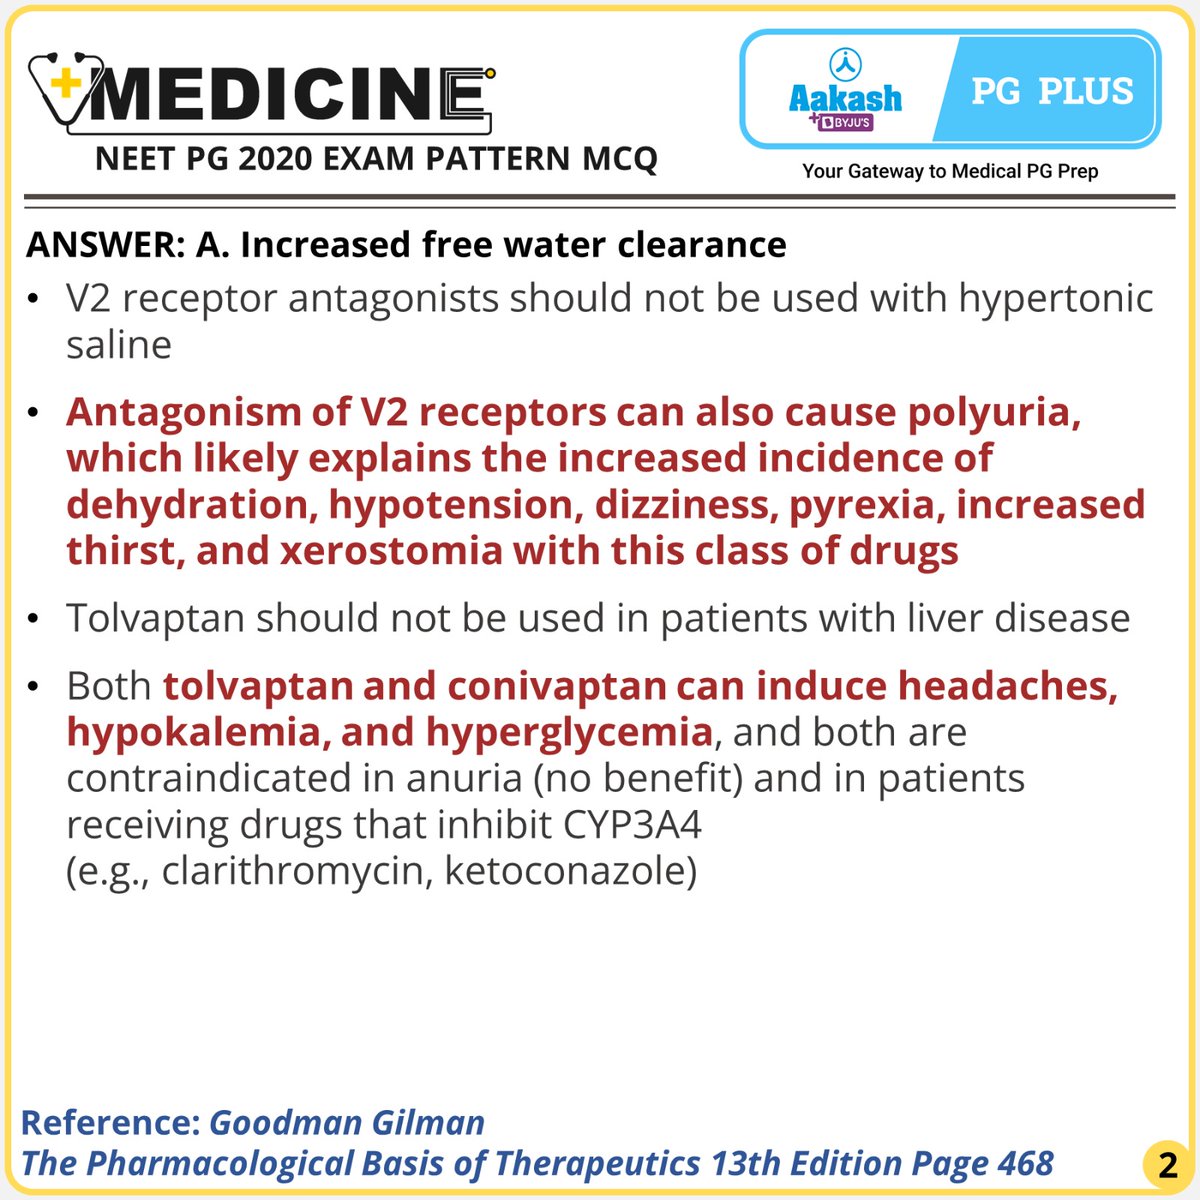 Must Know MCQ from Medicine with detailed answer and explanation.
Download the Aakash PG Plus Application to boost your NEET PG/INI CET/FMGE & NExT Preparation.
aakash.ac.in/pgplus/getapp
.
.
.
#aakashinstitute #aakashbyjus #aakashneetpg #nextexam #neetpg2024 #fmge #inicet #medicine